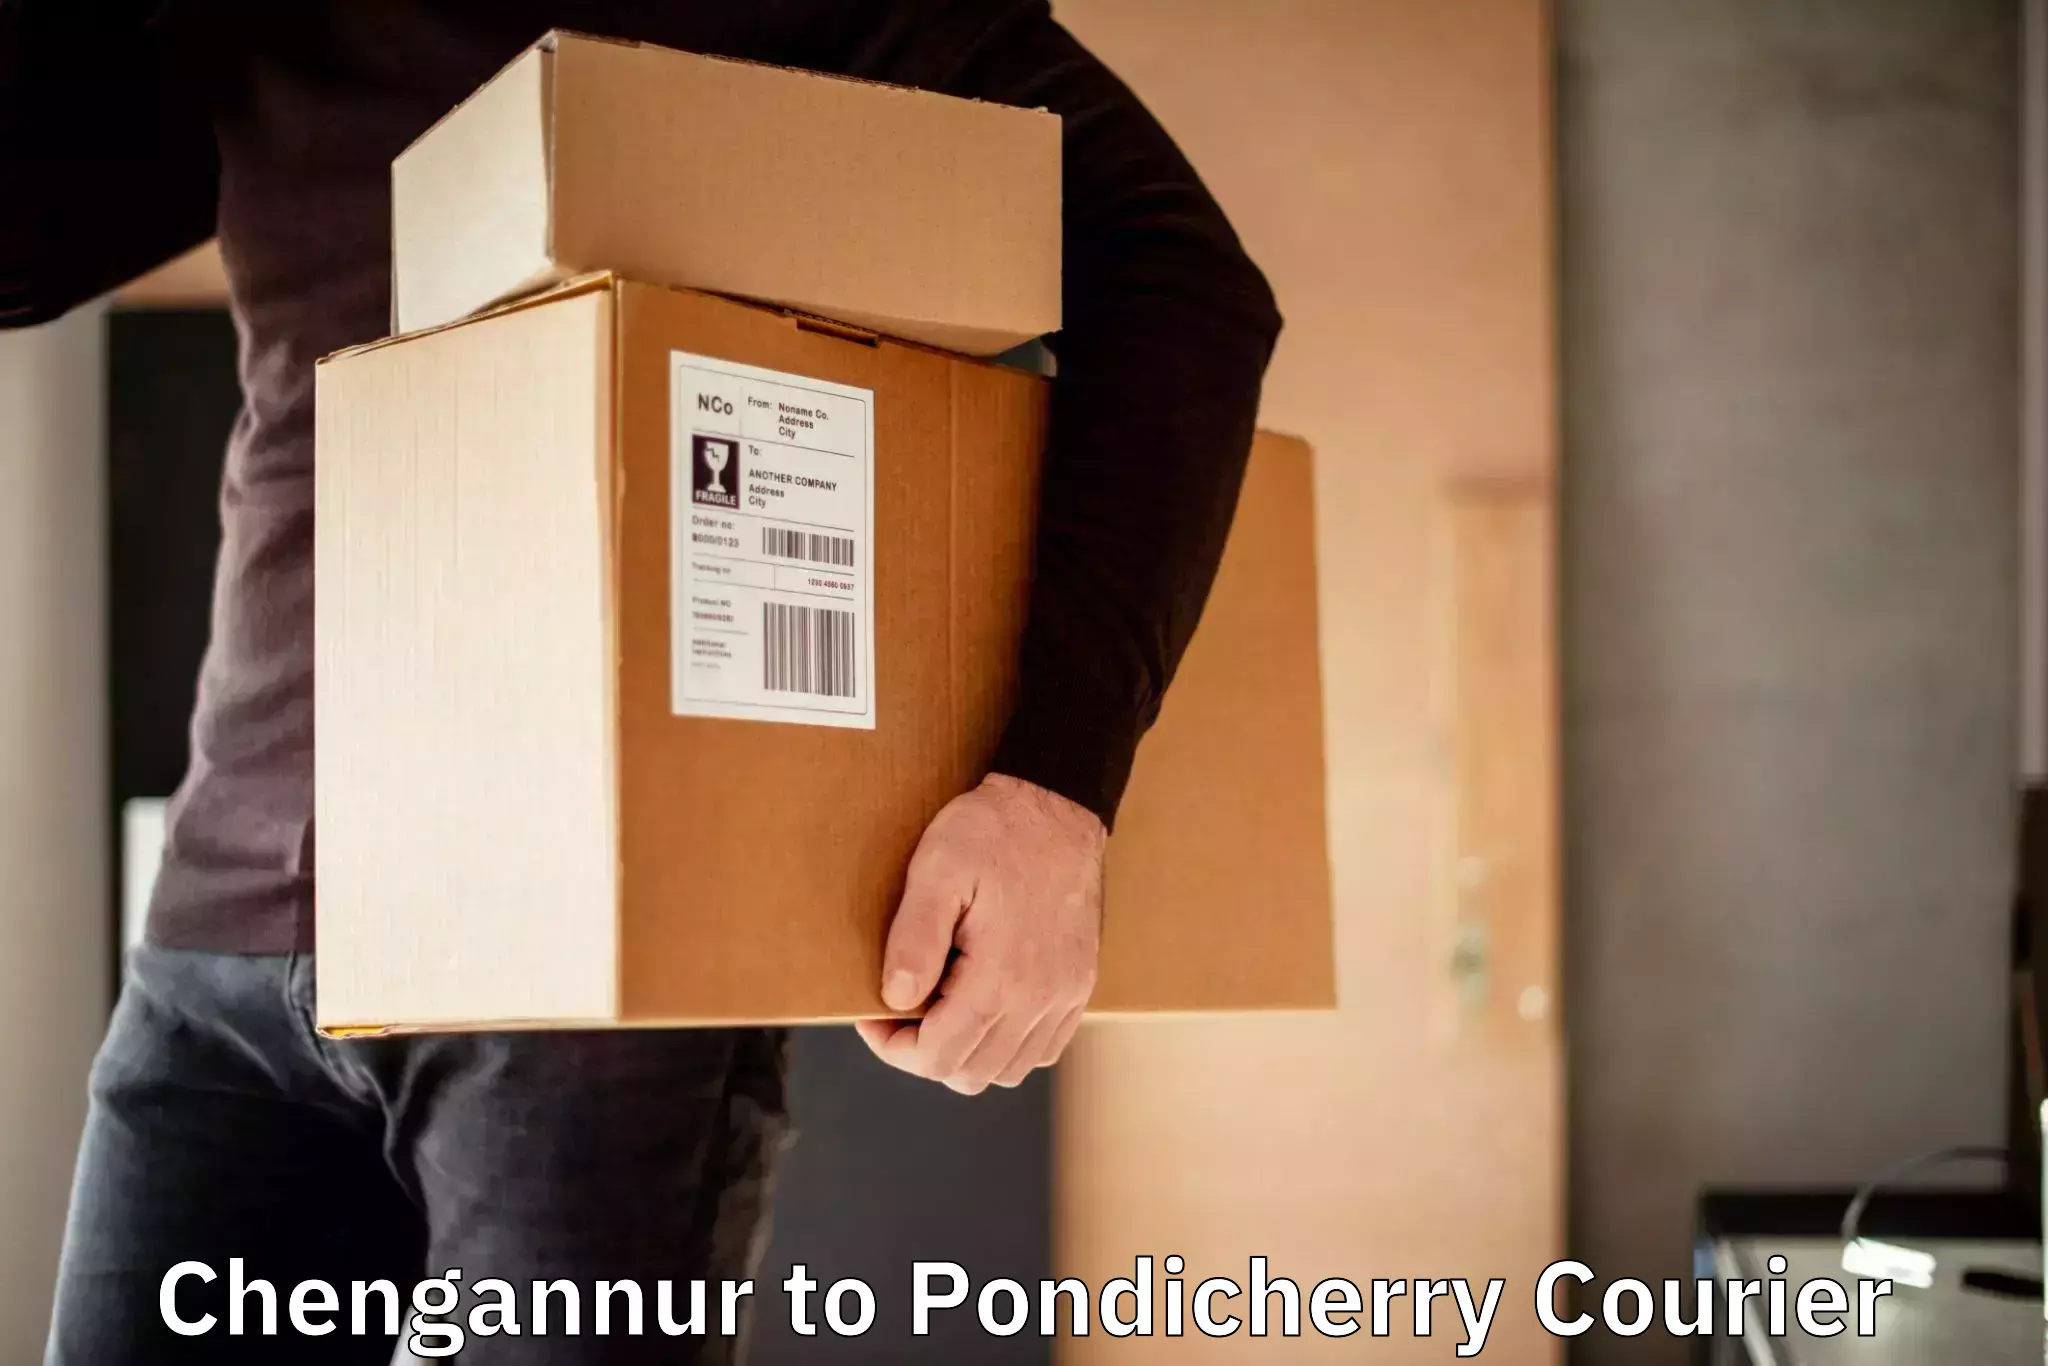 State-of-the-art courier technology Chengannur to Pondicherry